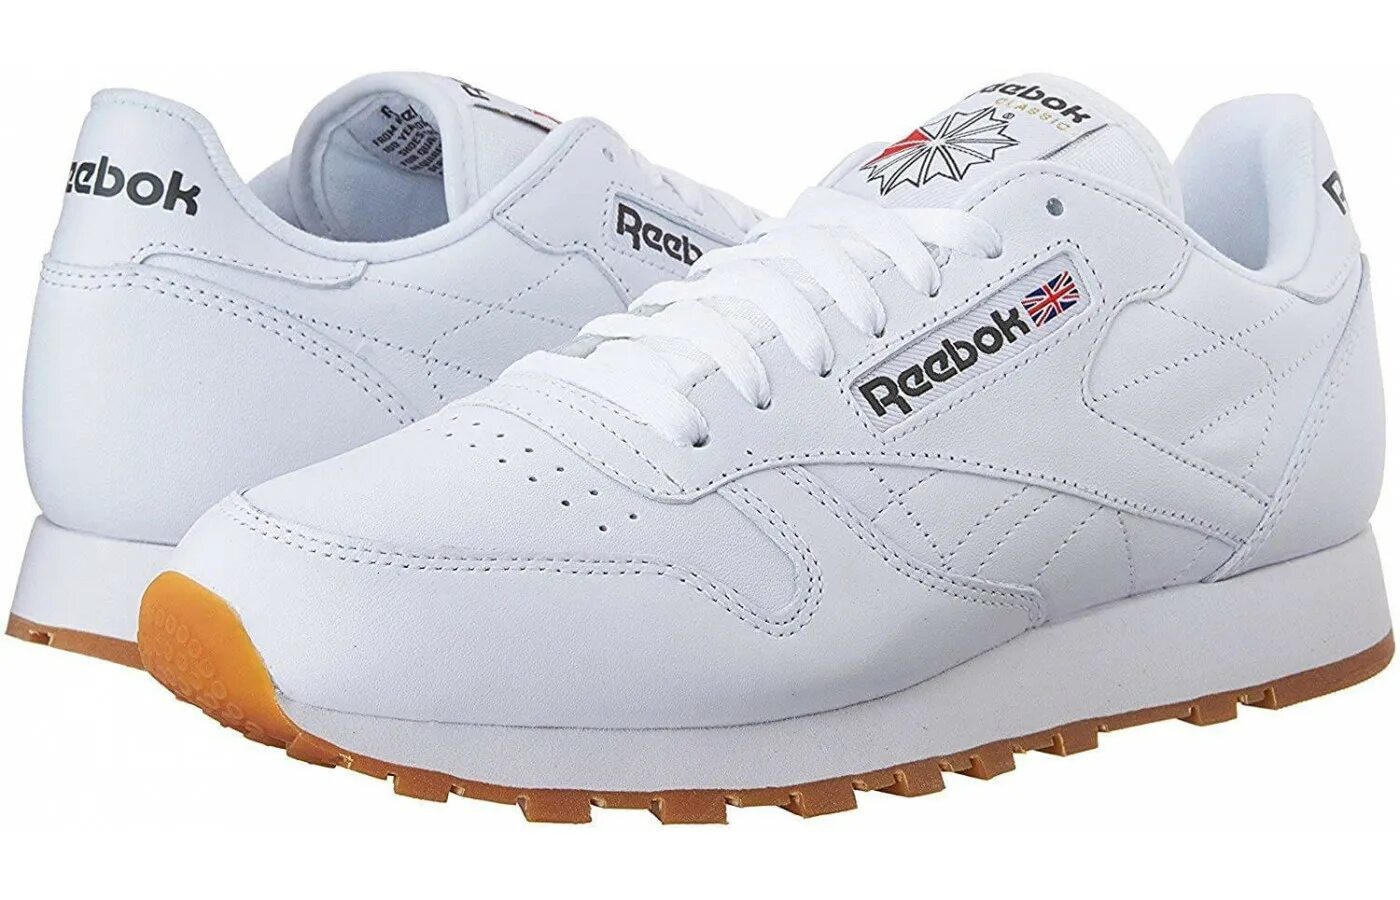 Reebok Classic Leather. Reebok Classic Leather White. Reebok Classic 2000. Hi4504 Reebok. Купить reebok leather